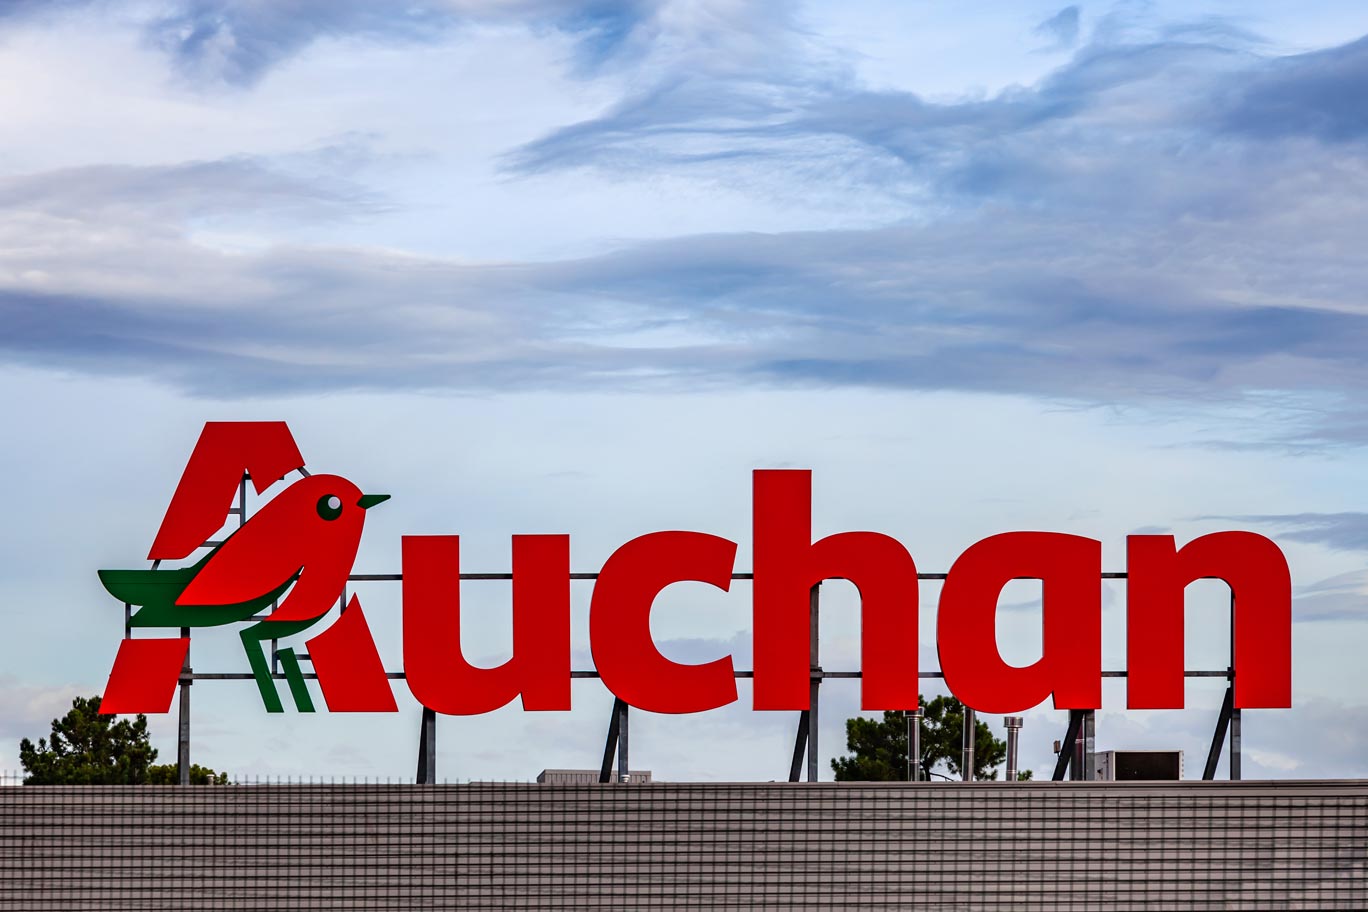 auchan image with the logo